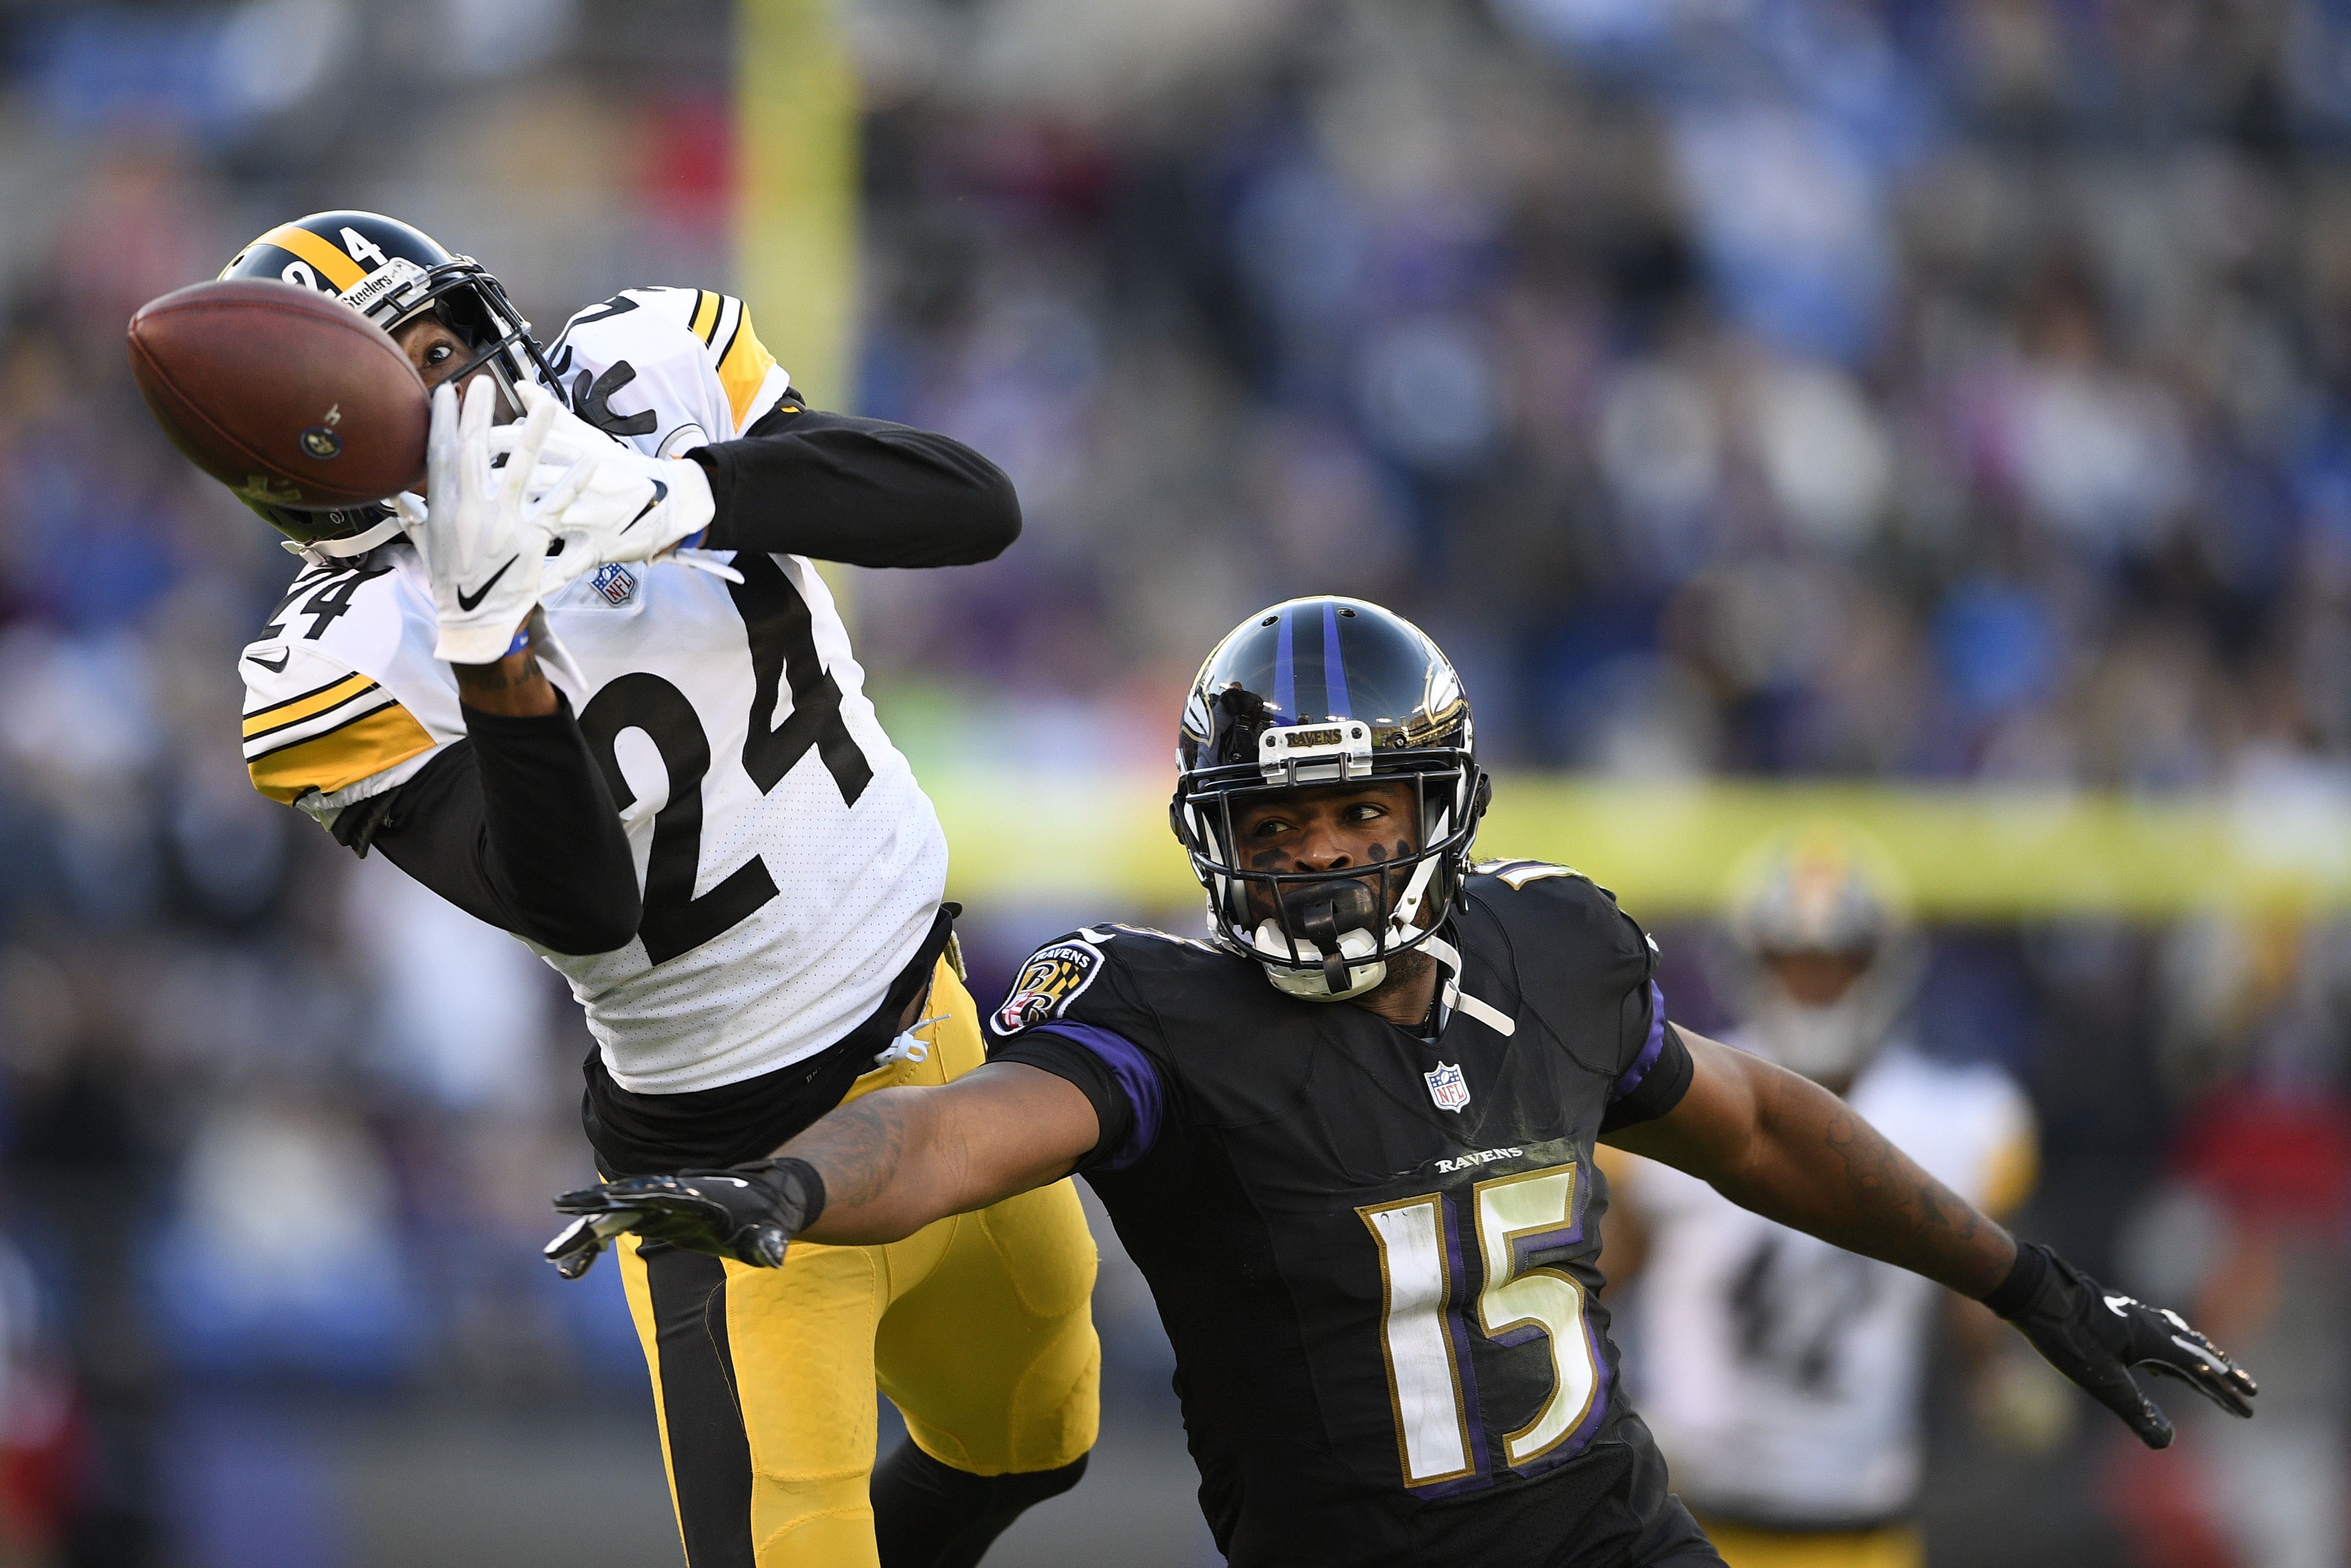 Roethlisberger leads Steelers to win over Ravens